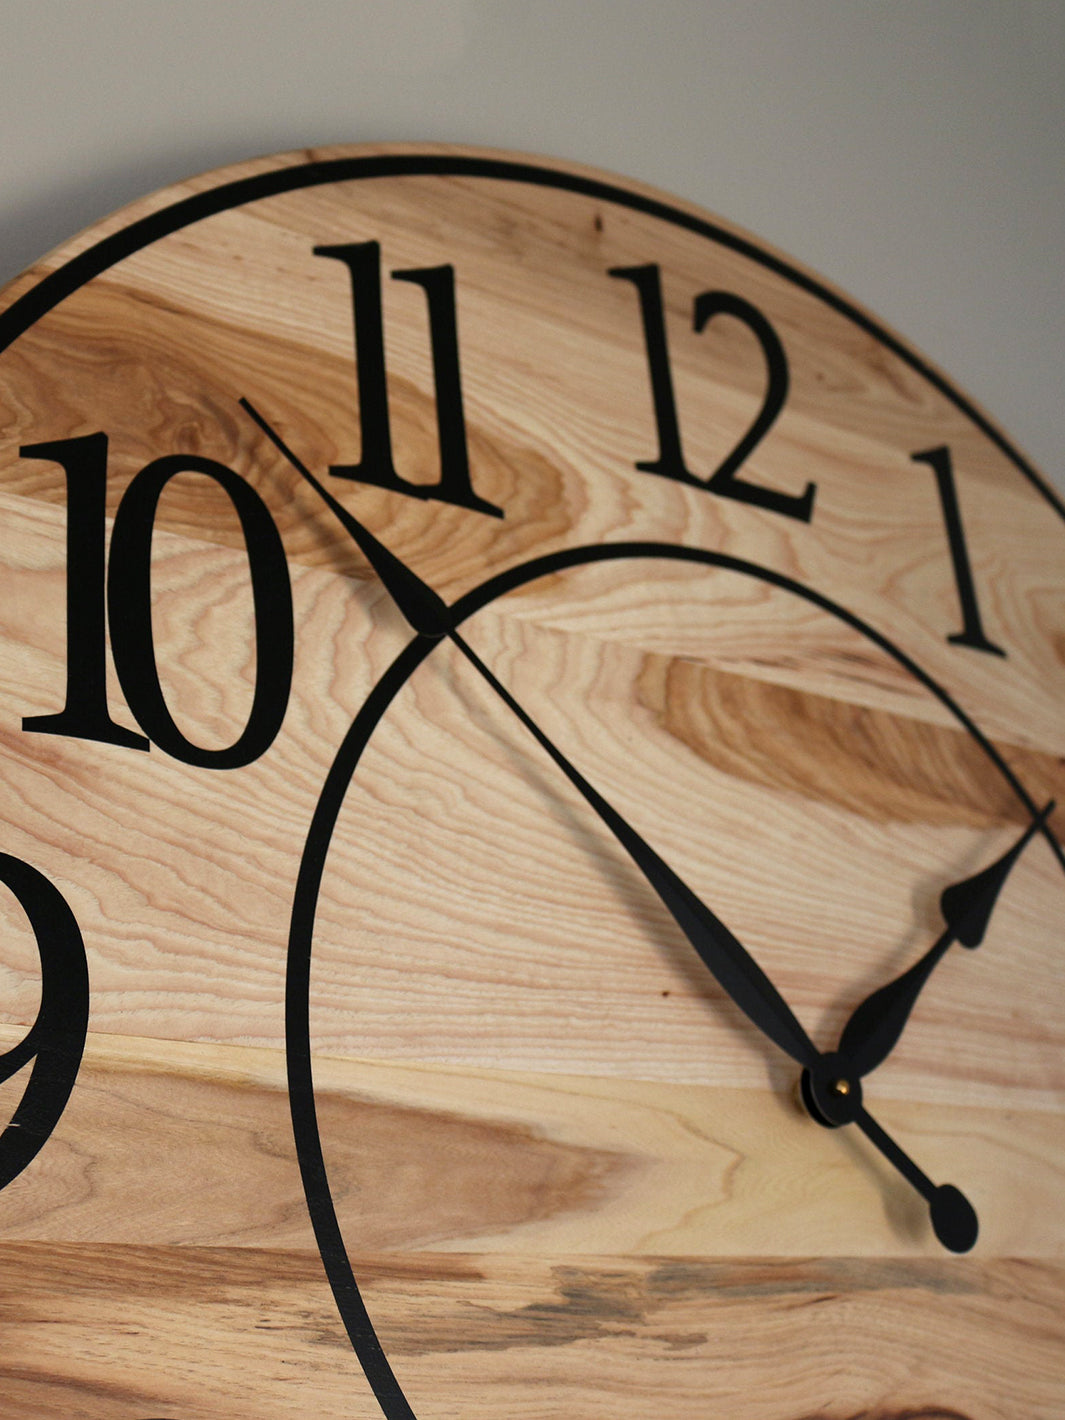 Solid Hickory Wood Wall Clock with Numbers and Lines Earthly Comfort Clocks 590-12